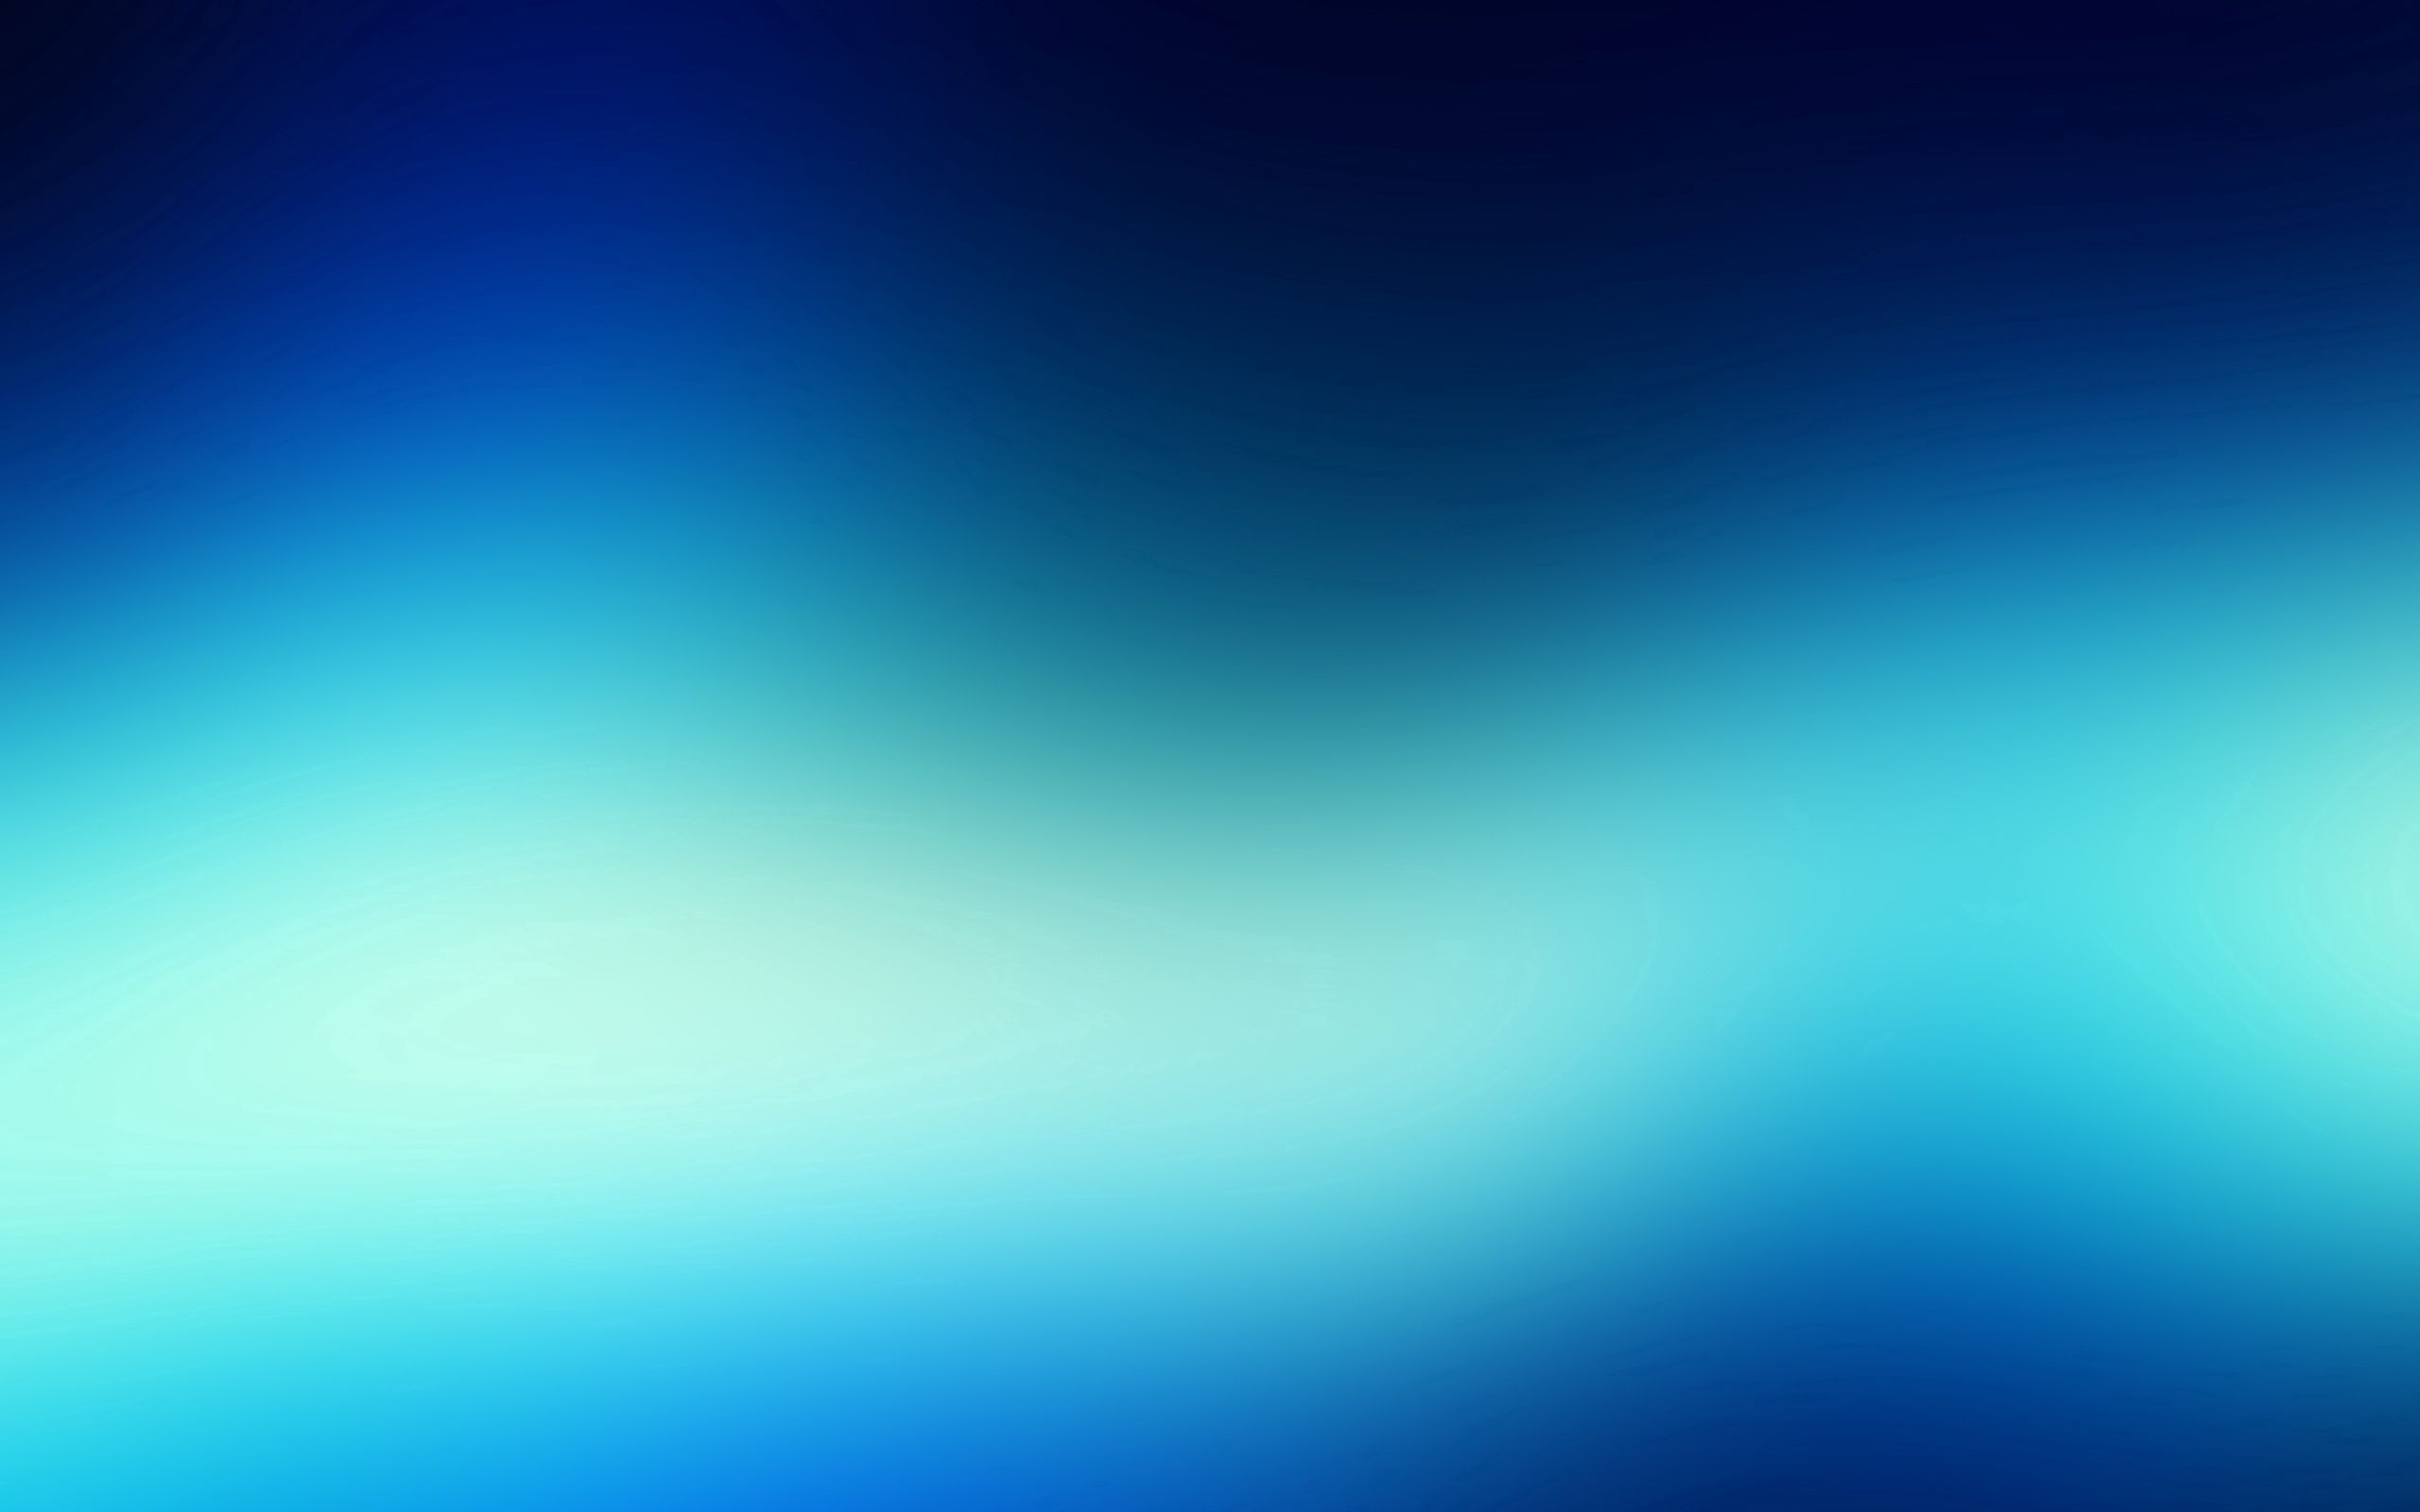 stains, textures, texture, shadow, background, surface, spots mobile wallpaper